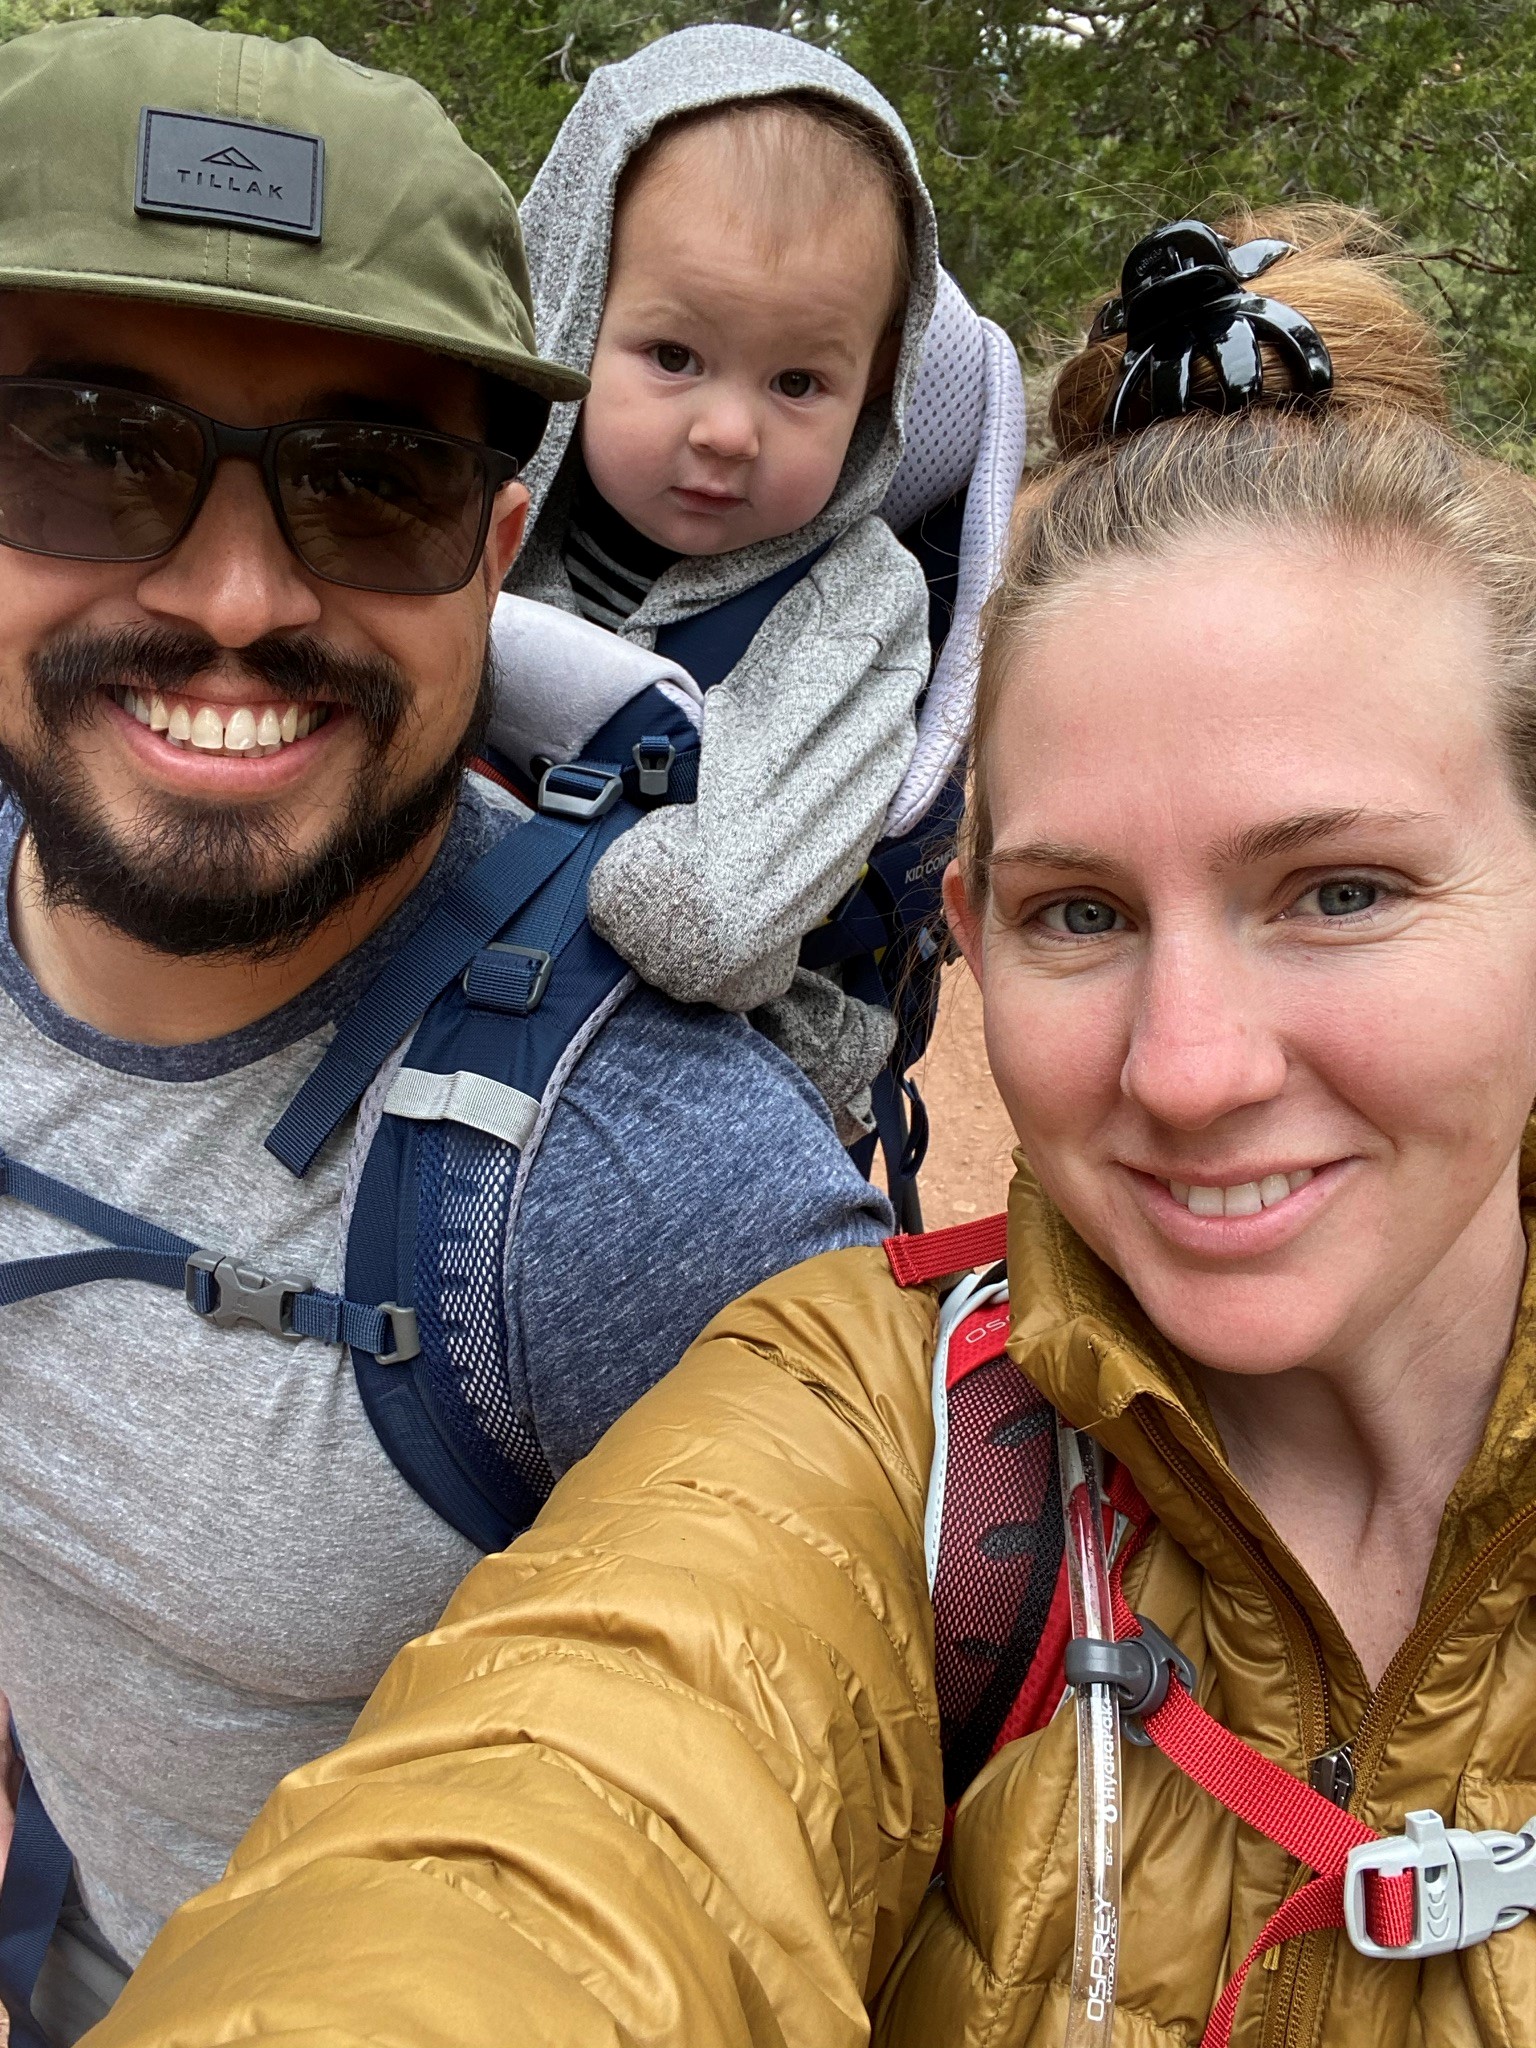 Selfie of Lindsay Estrada with husband and child on camping trip.